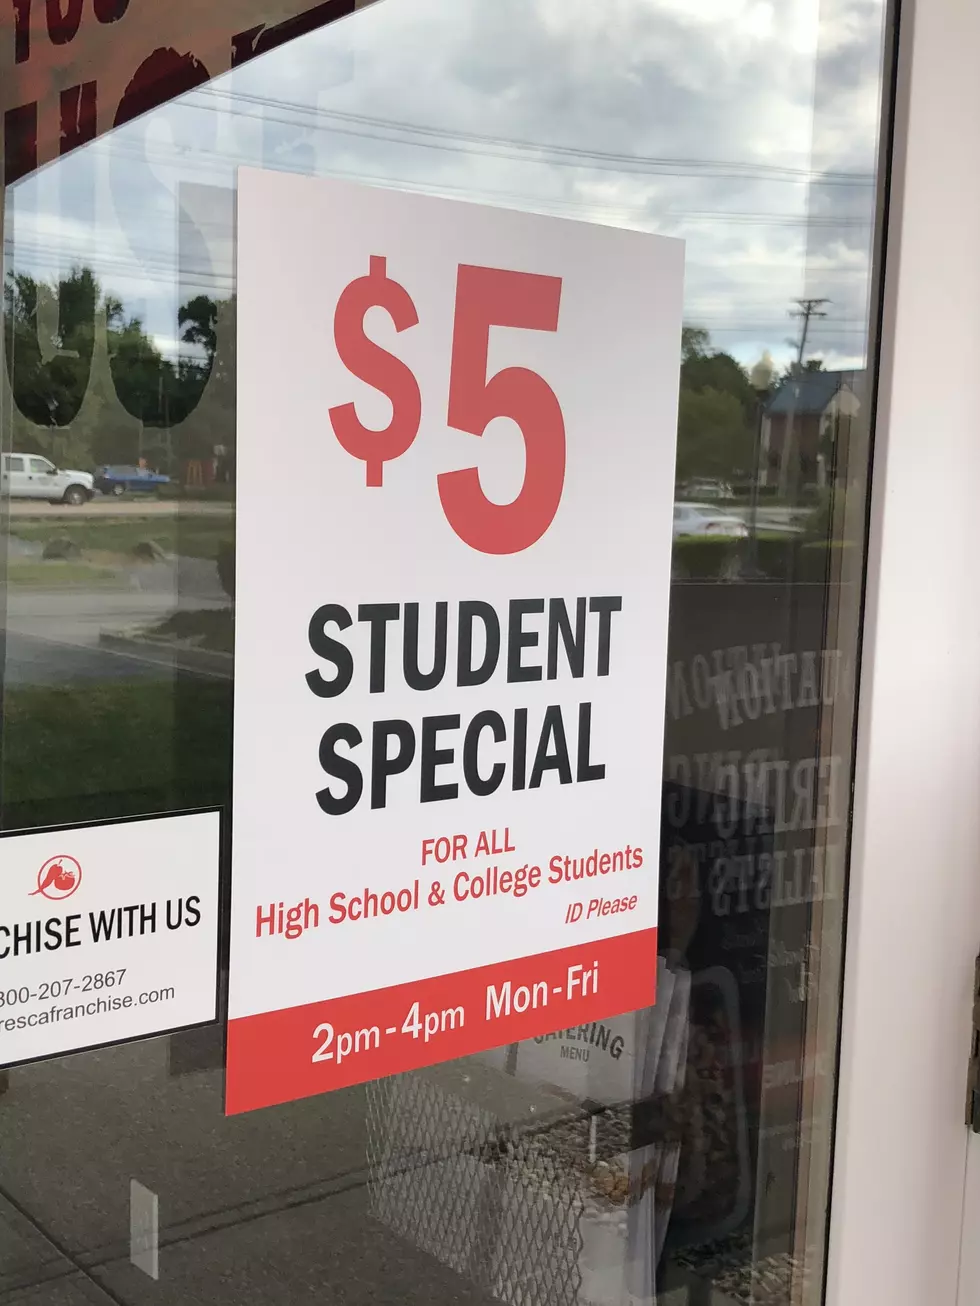 New Local Restaurant Has College Discounts Five Days A Week